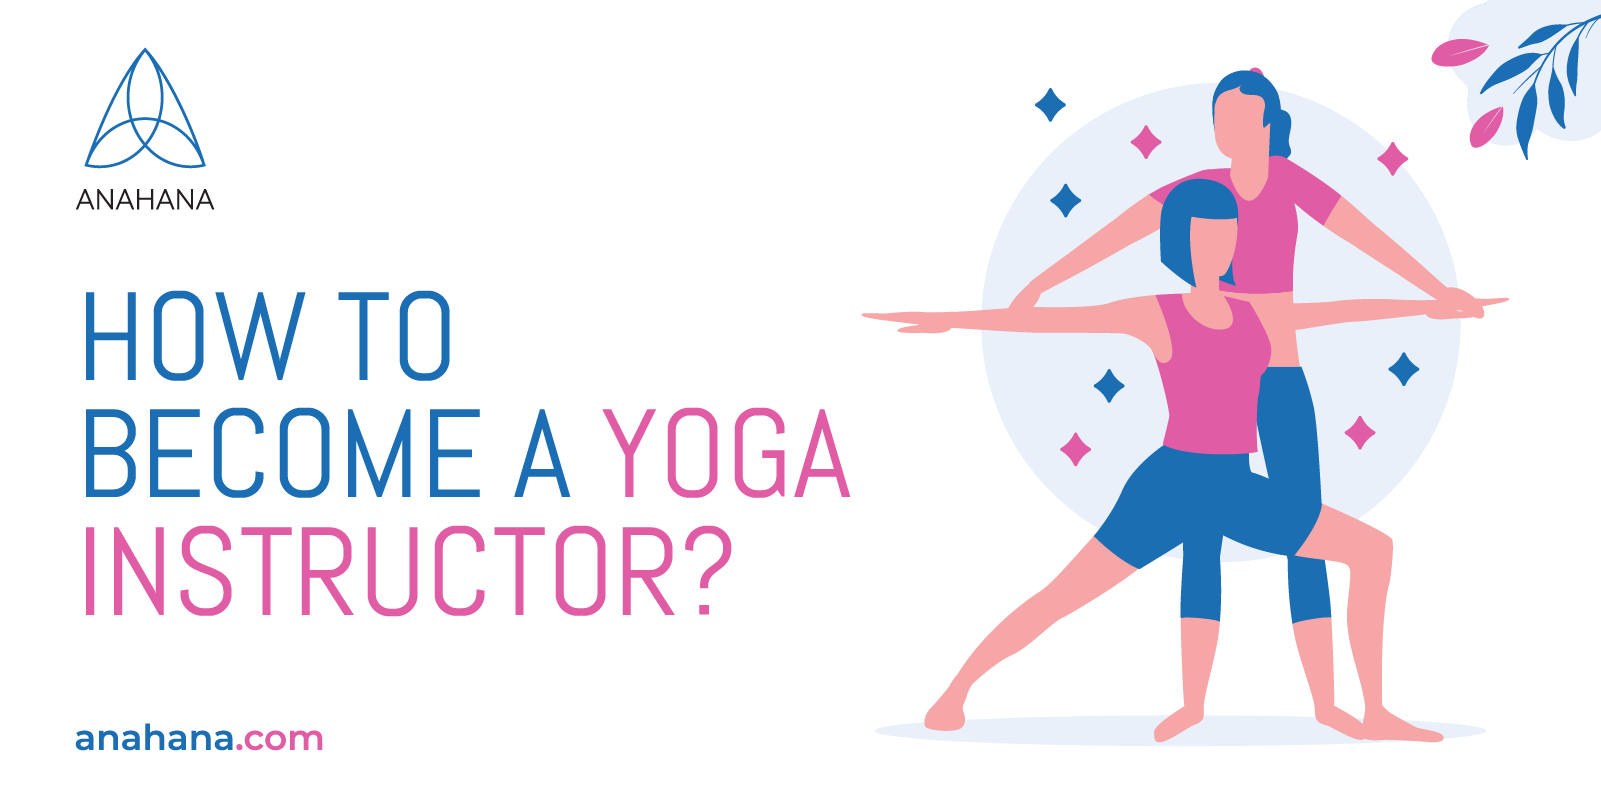 How to Become a Yoga Instructor - Advise & Helpful Resources